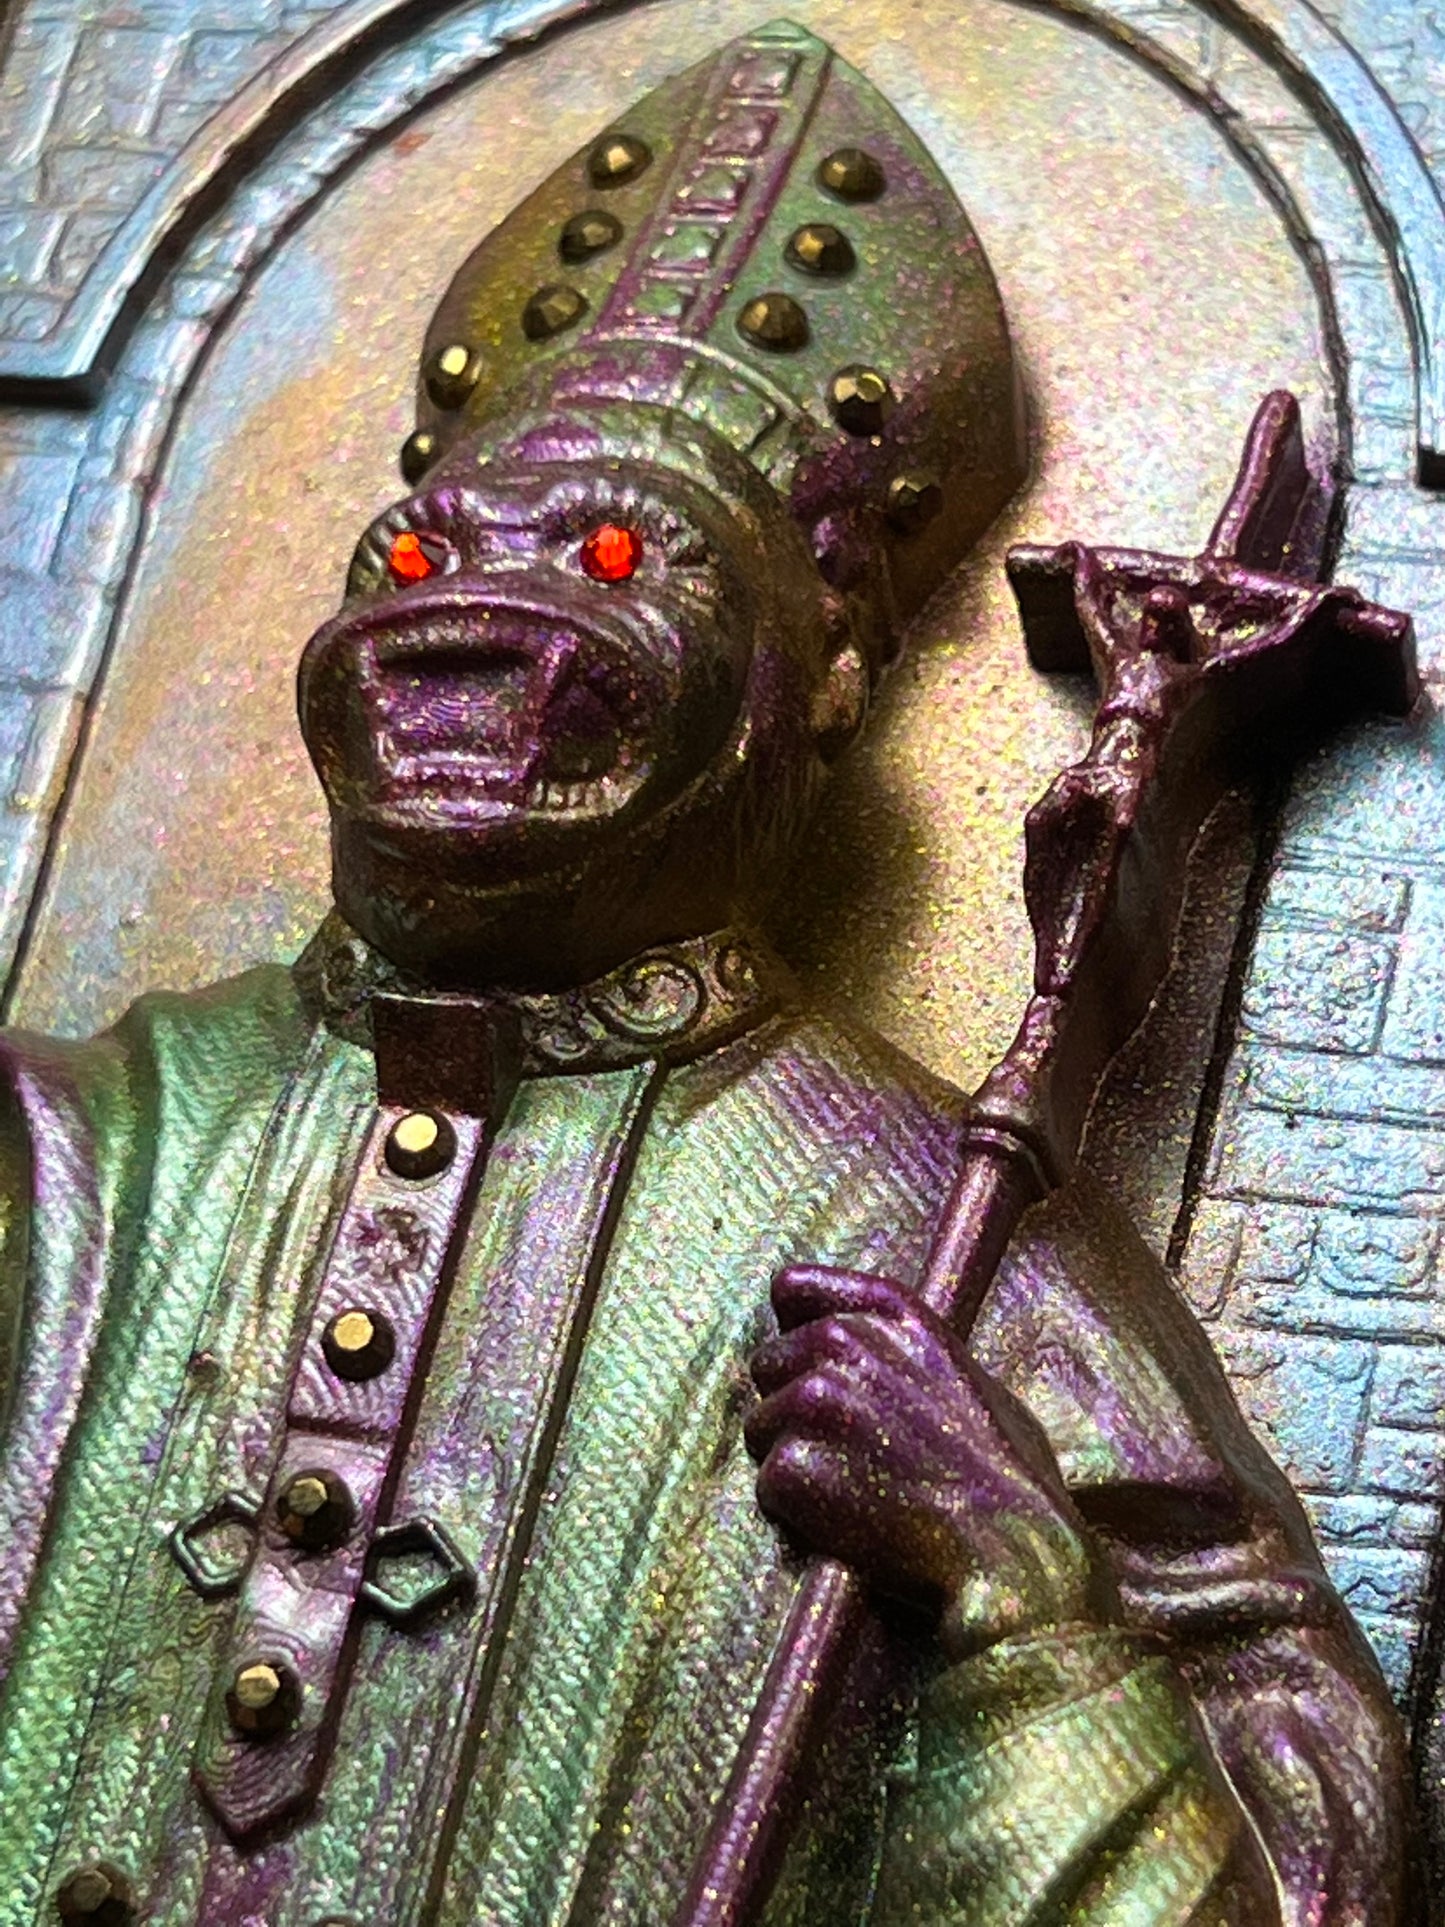 The Ape Bishop: Treasure From the Mountain of the Apes